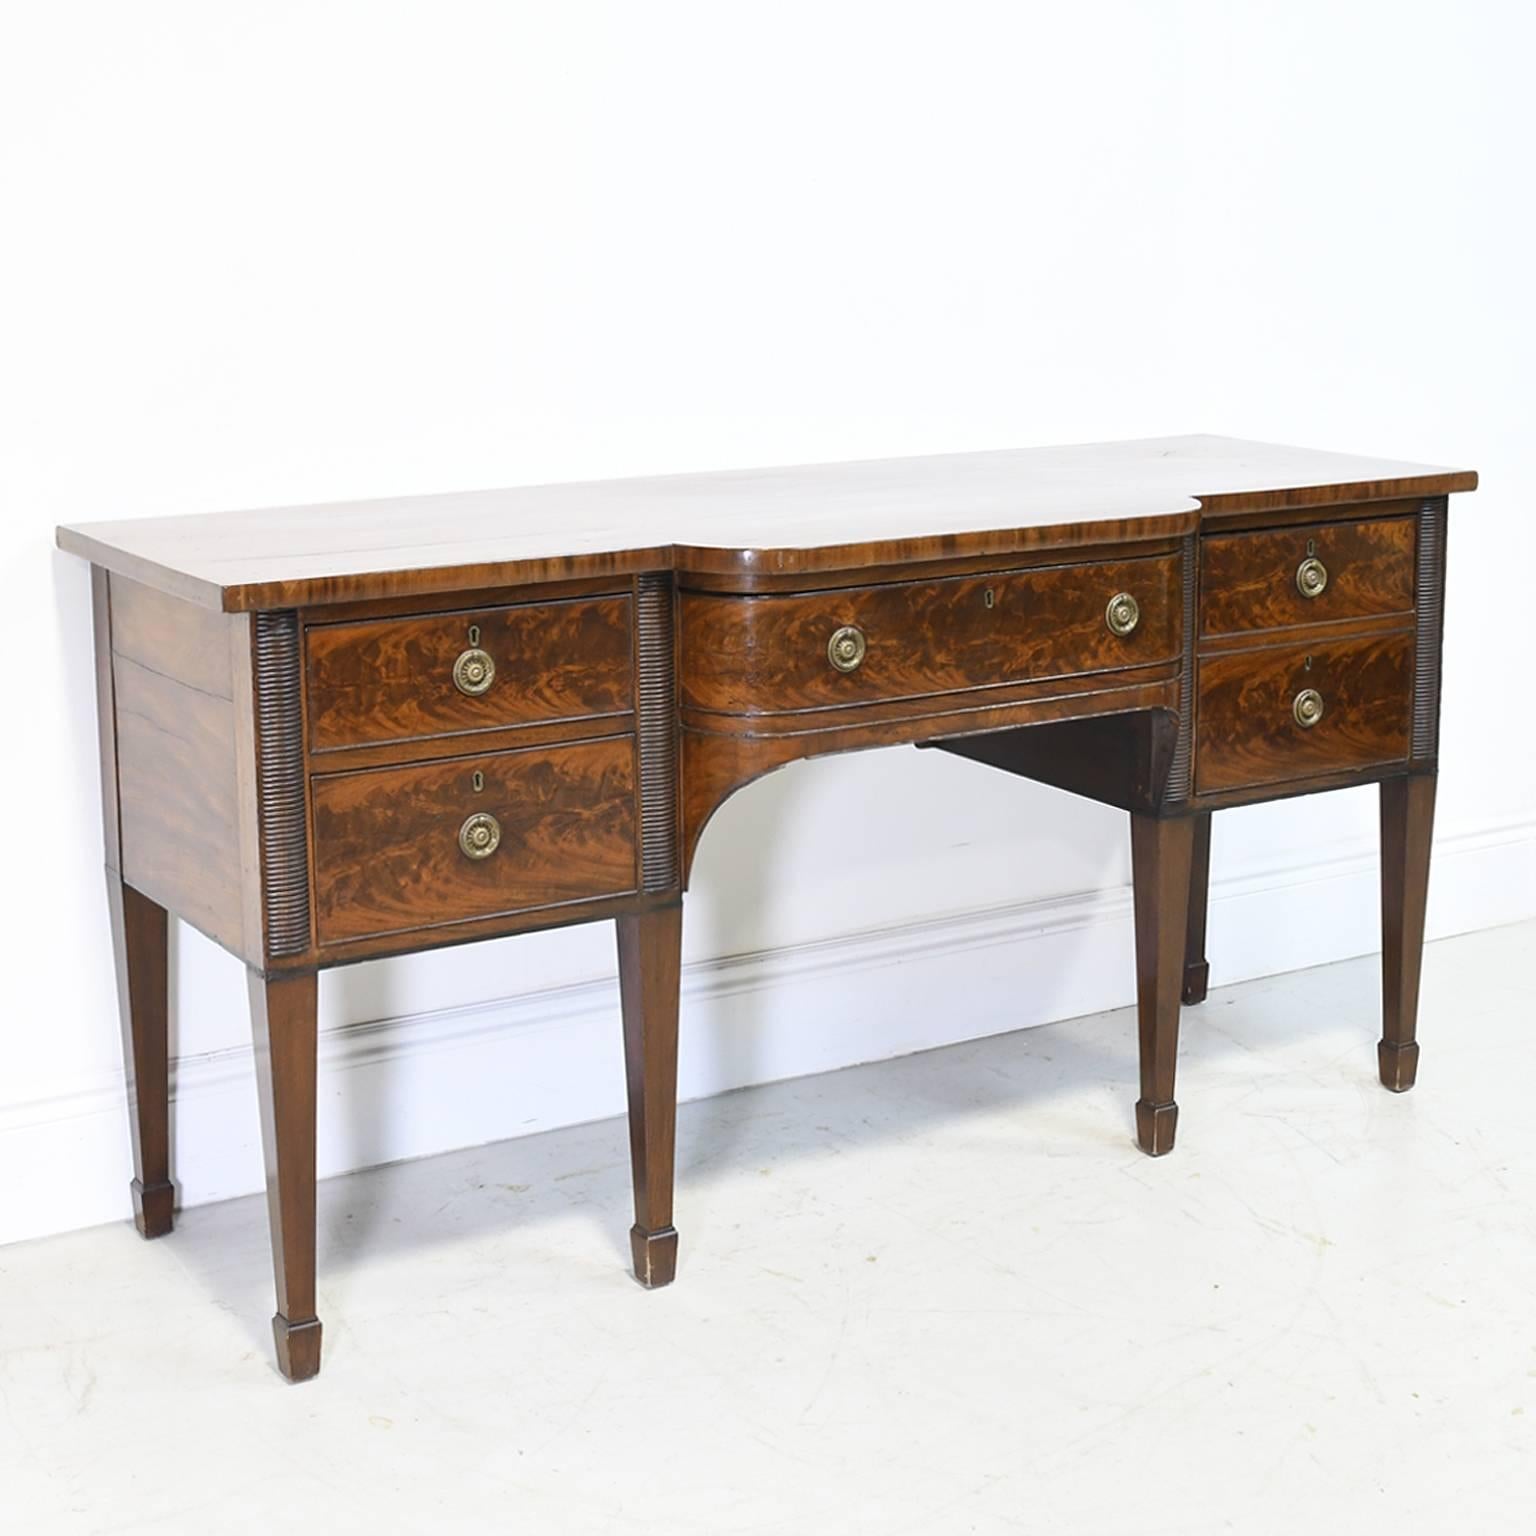 A very handsome English country manor house hunt board / sideboard in figured mahogany from the Georgian period. Features a base that rests on long square tapering legs with spade feet, housing a cellarette drawer for bottles on the right side, two